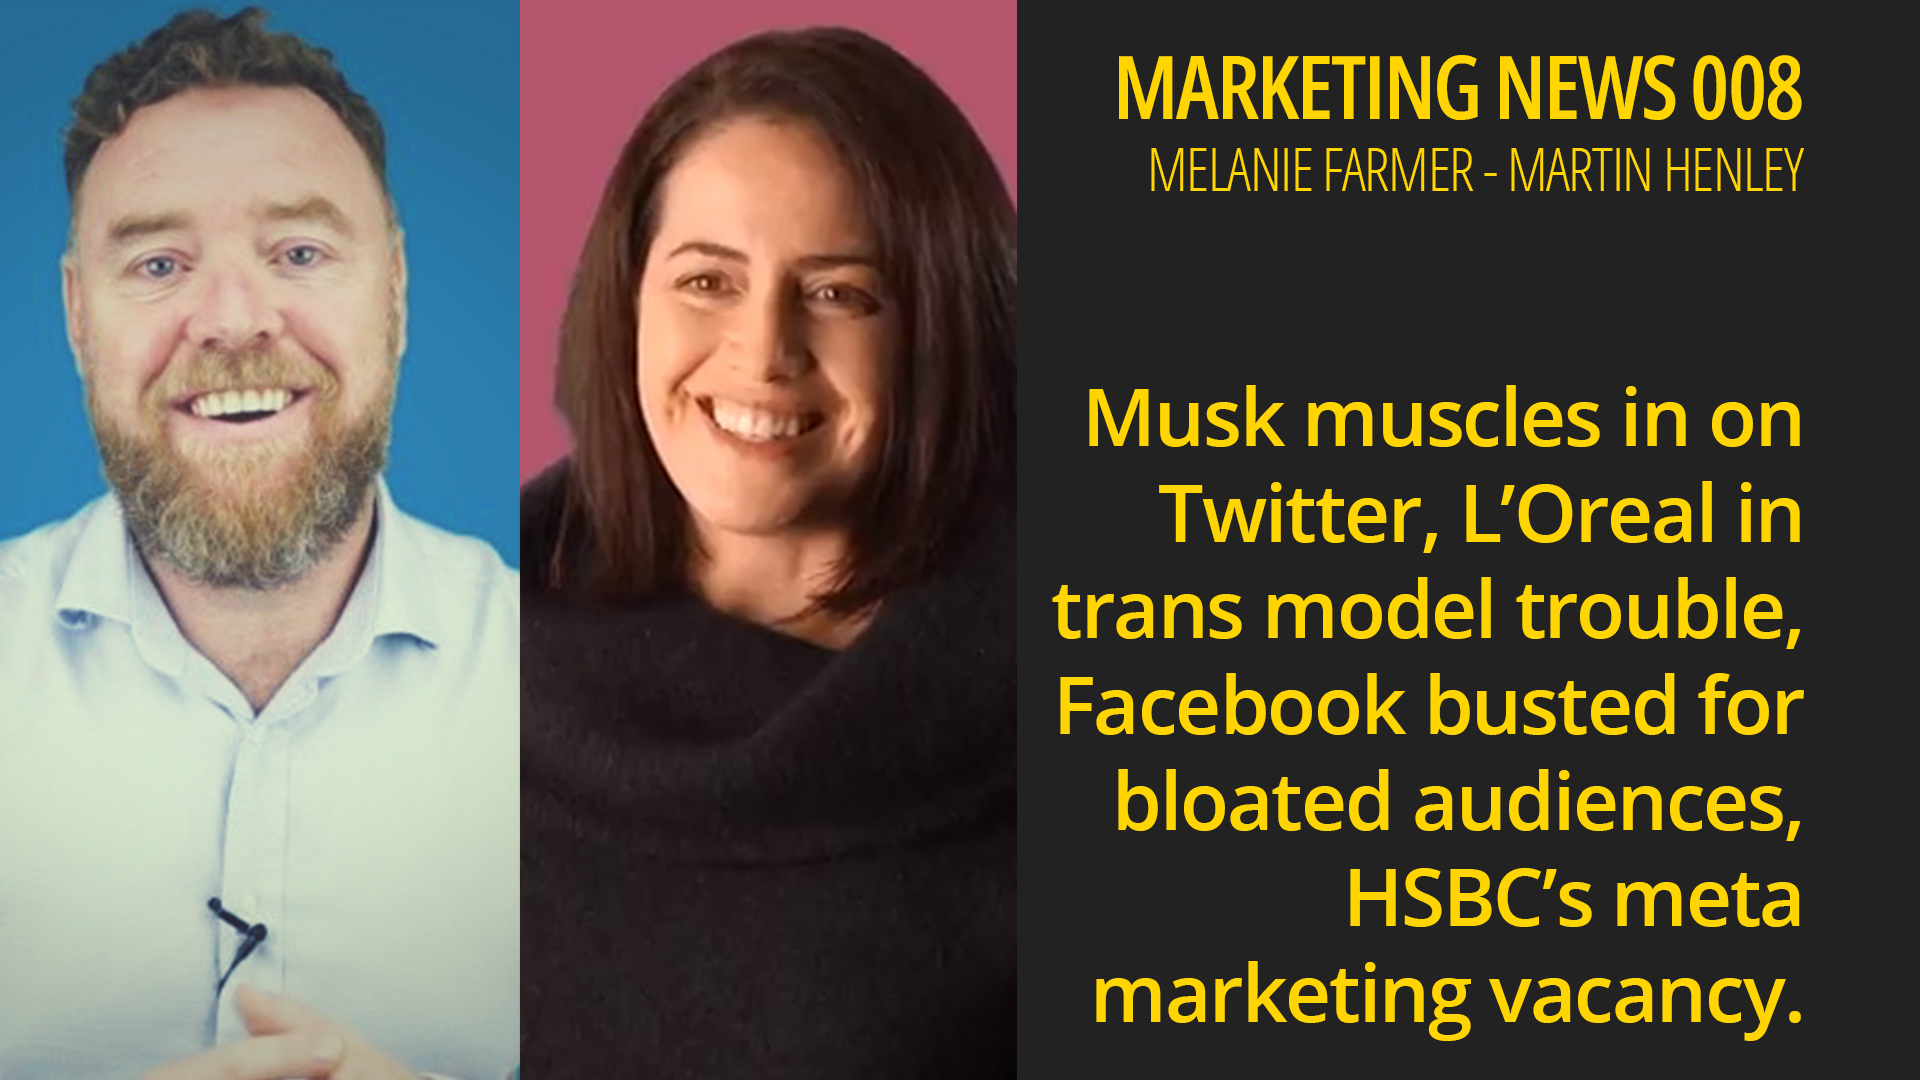 Musk Twitter, L’Oreal trouble, Facebook busted, HSBC meta marketing vacancy – Marketing News 008